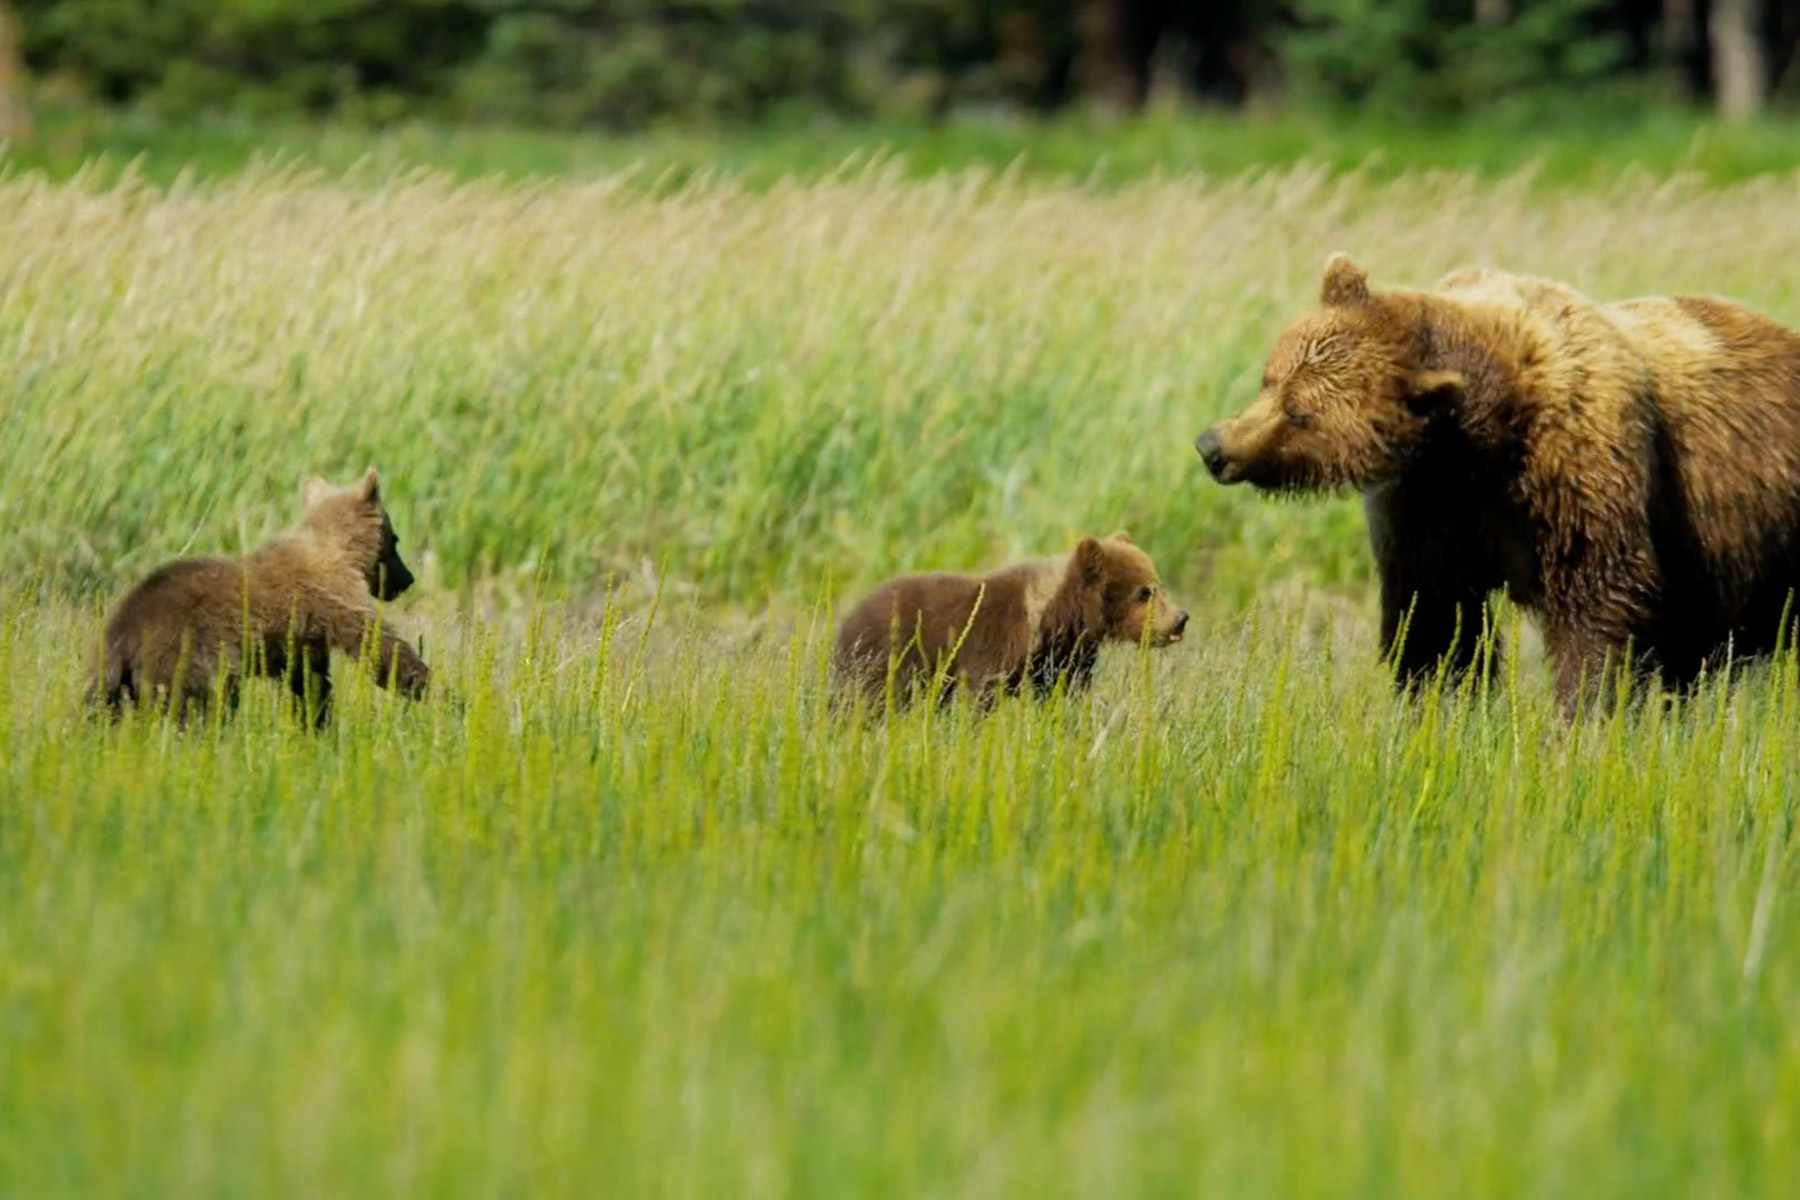 Brown bear and cubs in the wild